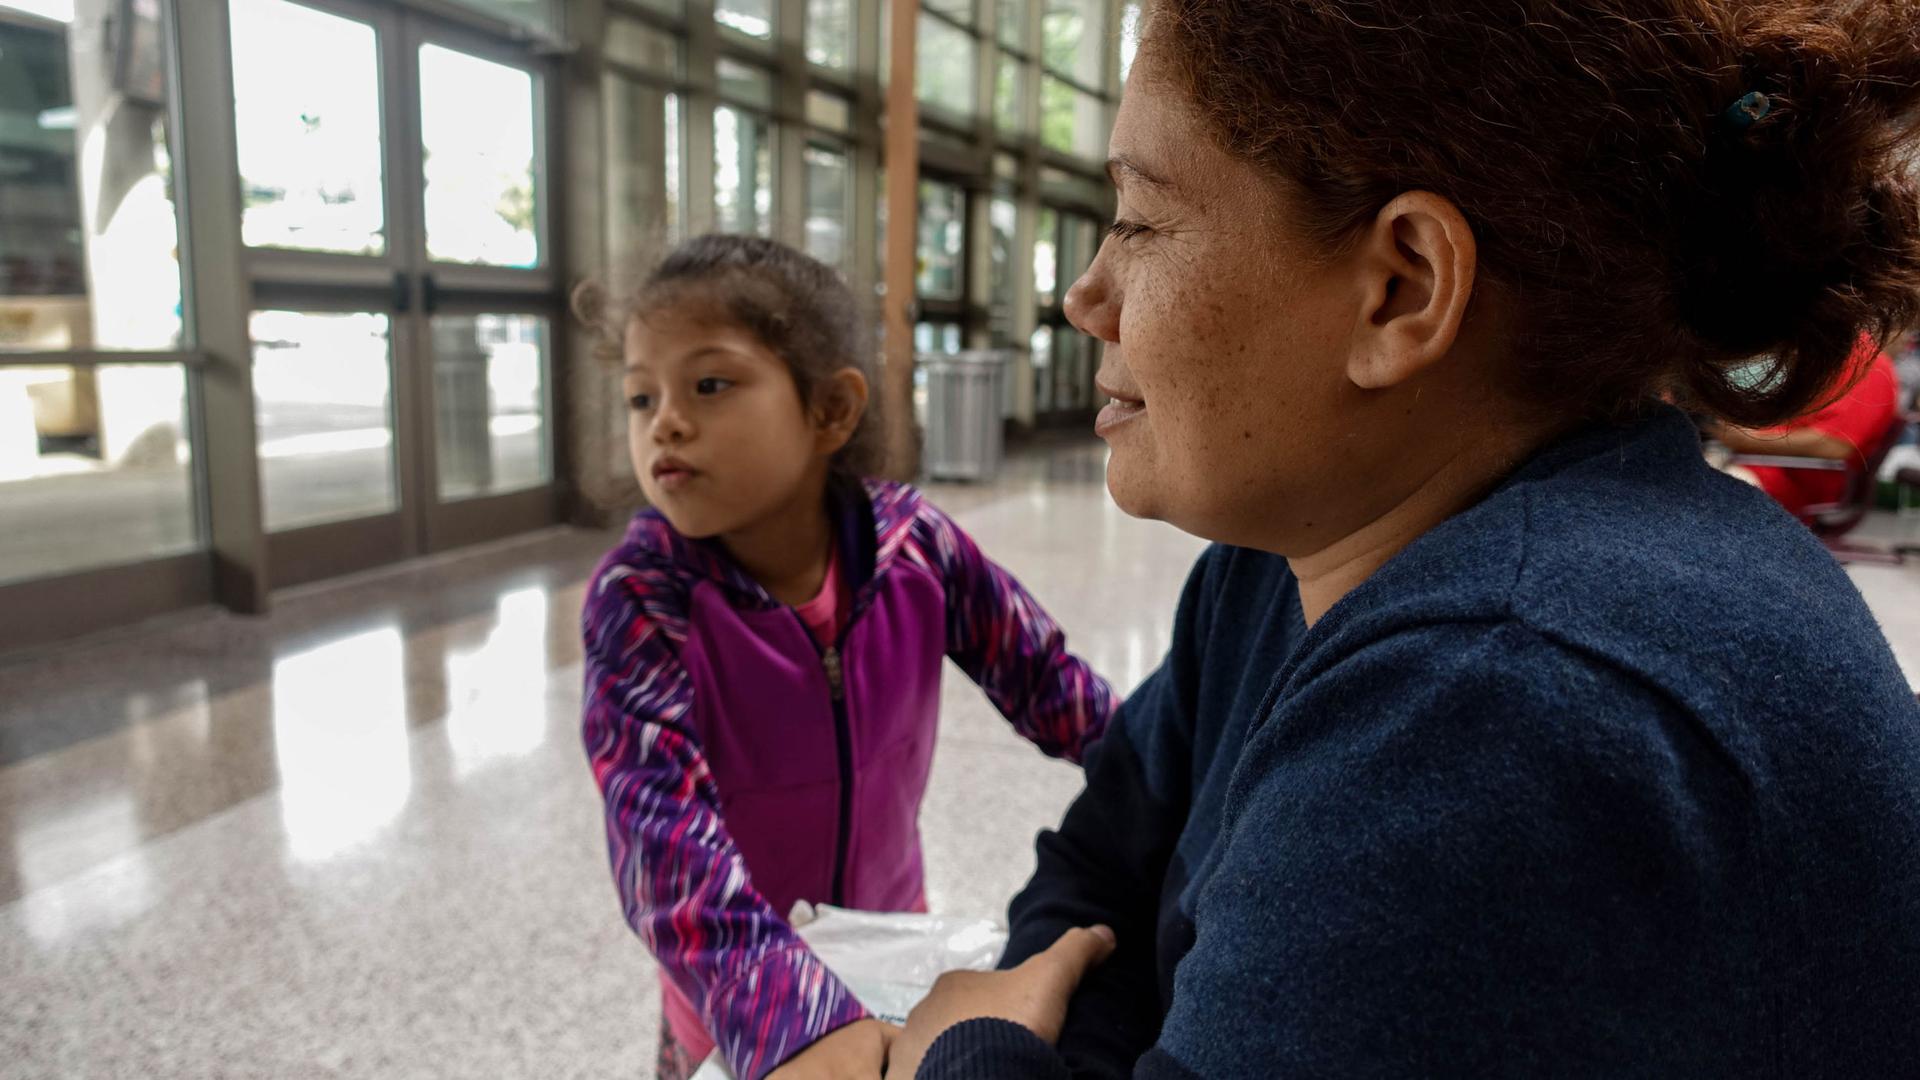 A close-up photo of a mother and her daughter, who is wearing pink, at a bus station. 